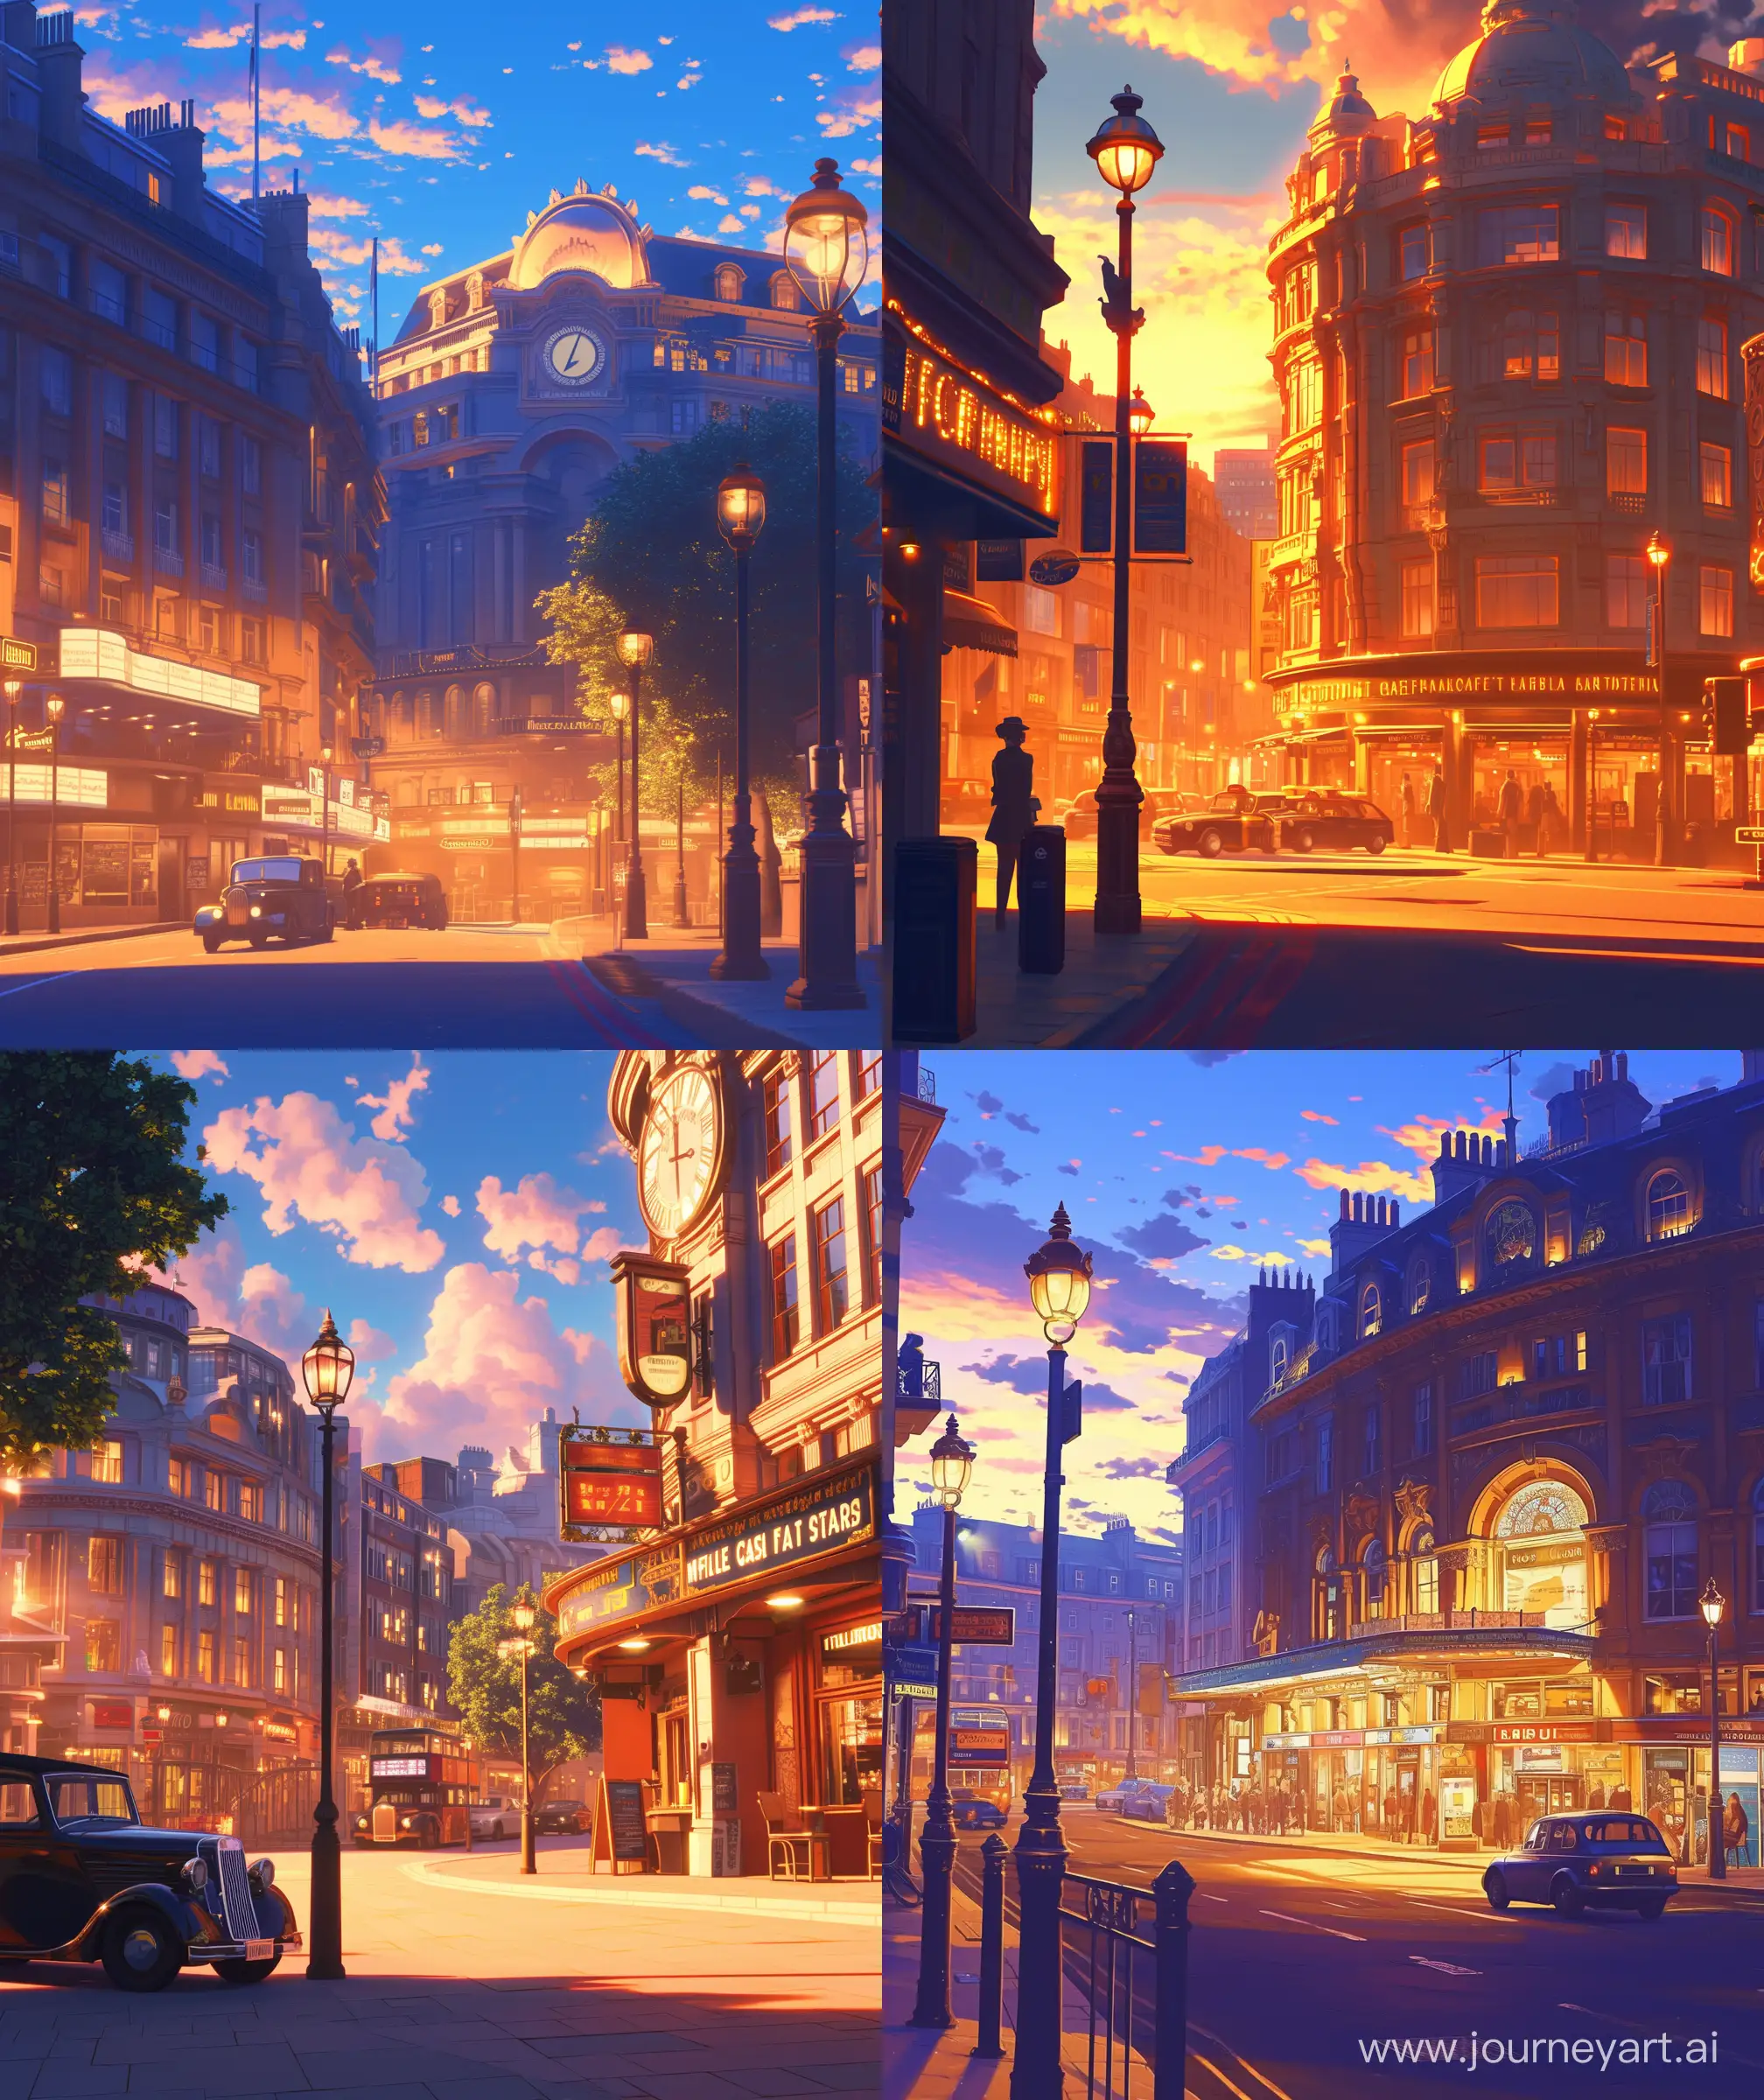 Beautiful retro anime look, street view, busting city, car, lamp posts, cinema hall, london, cafe, glowing sign board, evening time, sunlight over building, retro look,  anime style image, mesmerizing look --ar 27:32 --niji 6